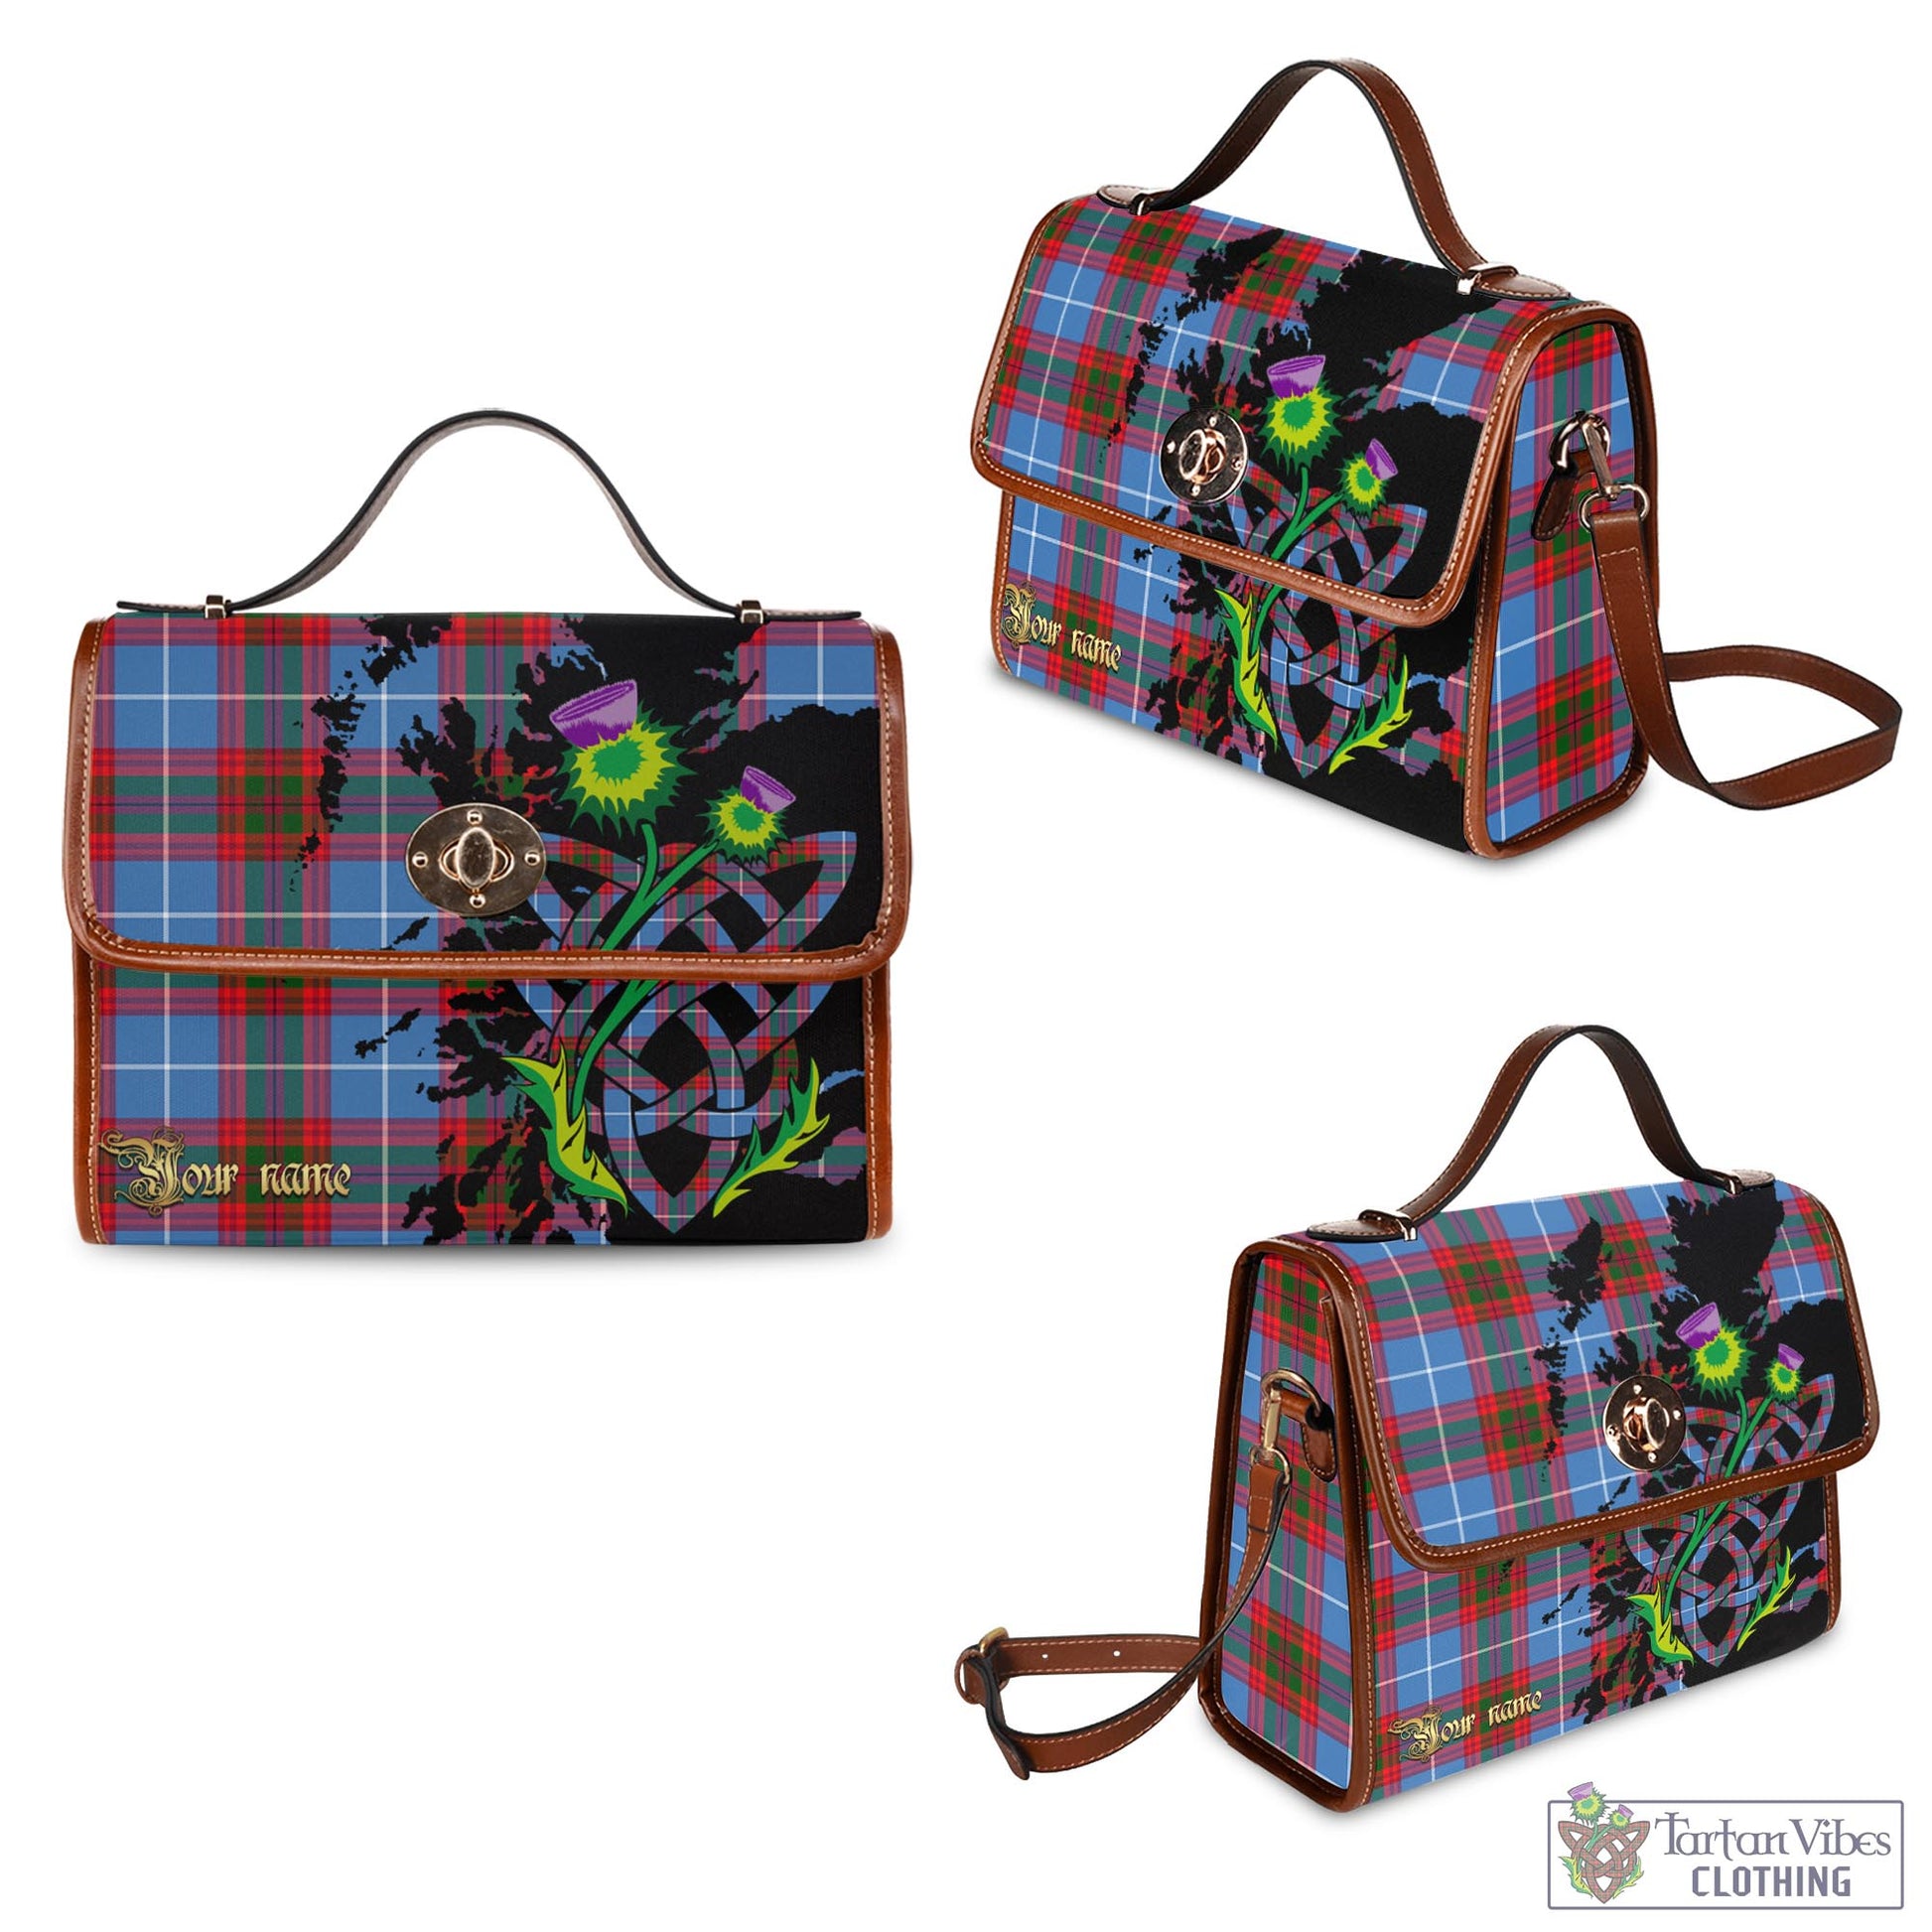 Tartan Vibes Clothing Crichton Tartan Waterproof Canvas Bag with Scotland Map and Thistle Celtic Accents